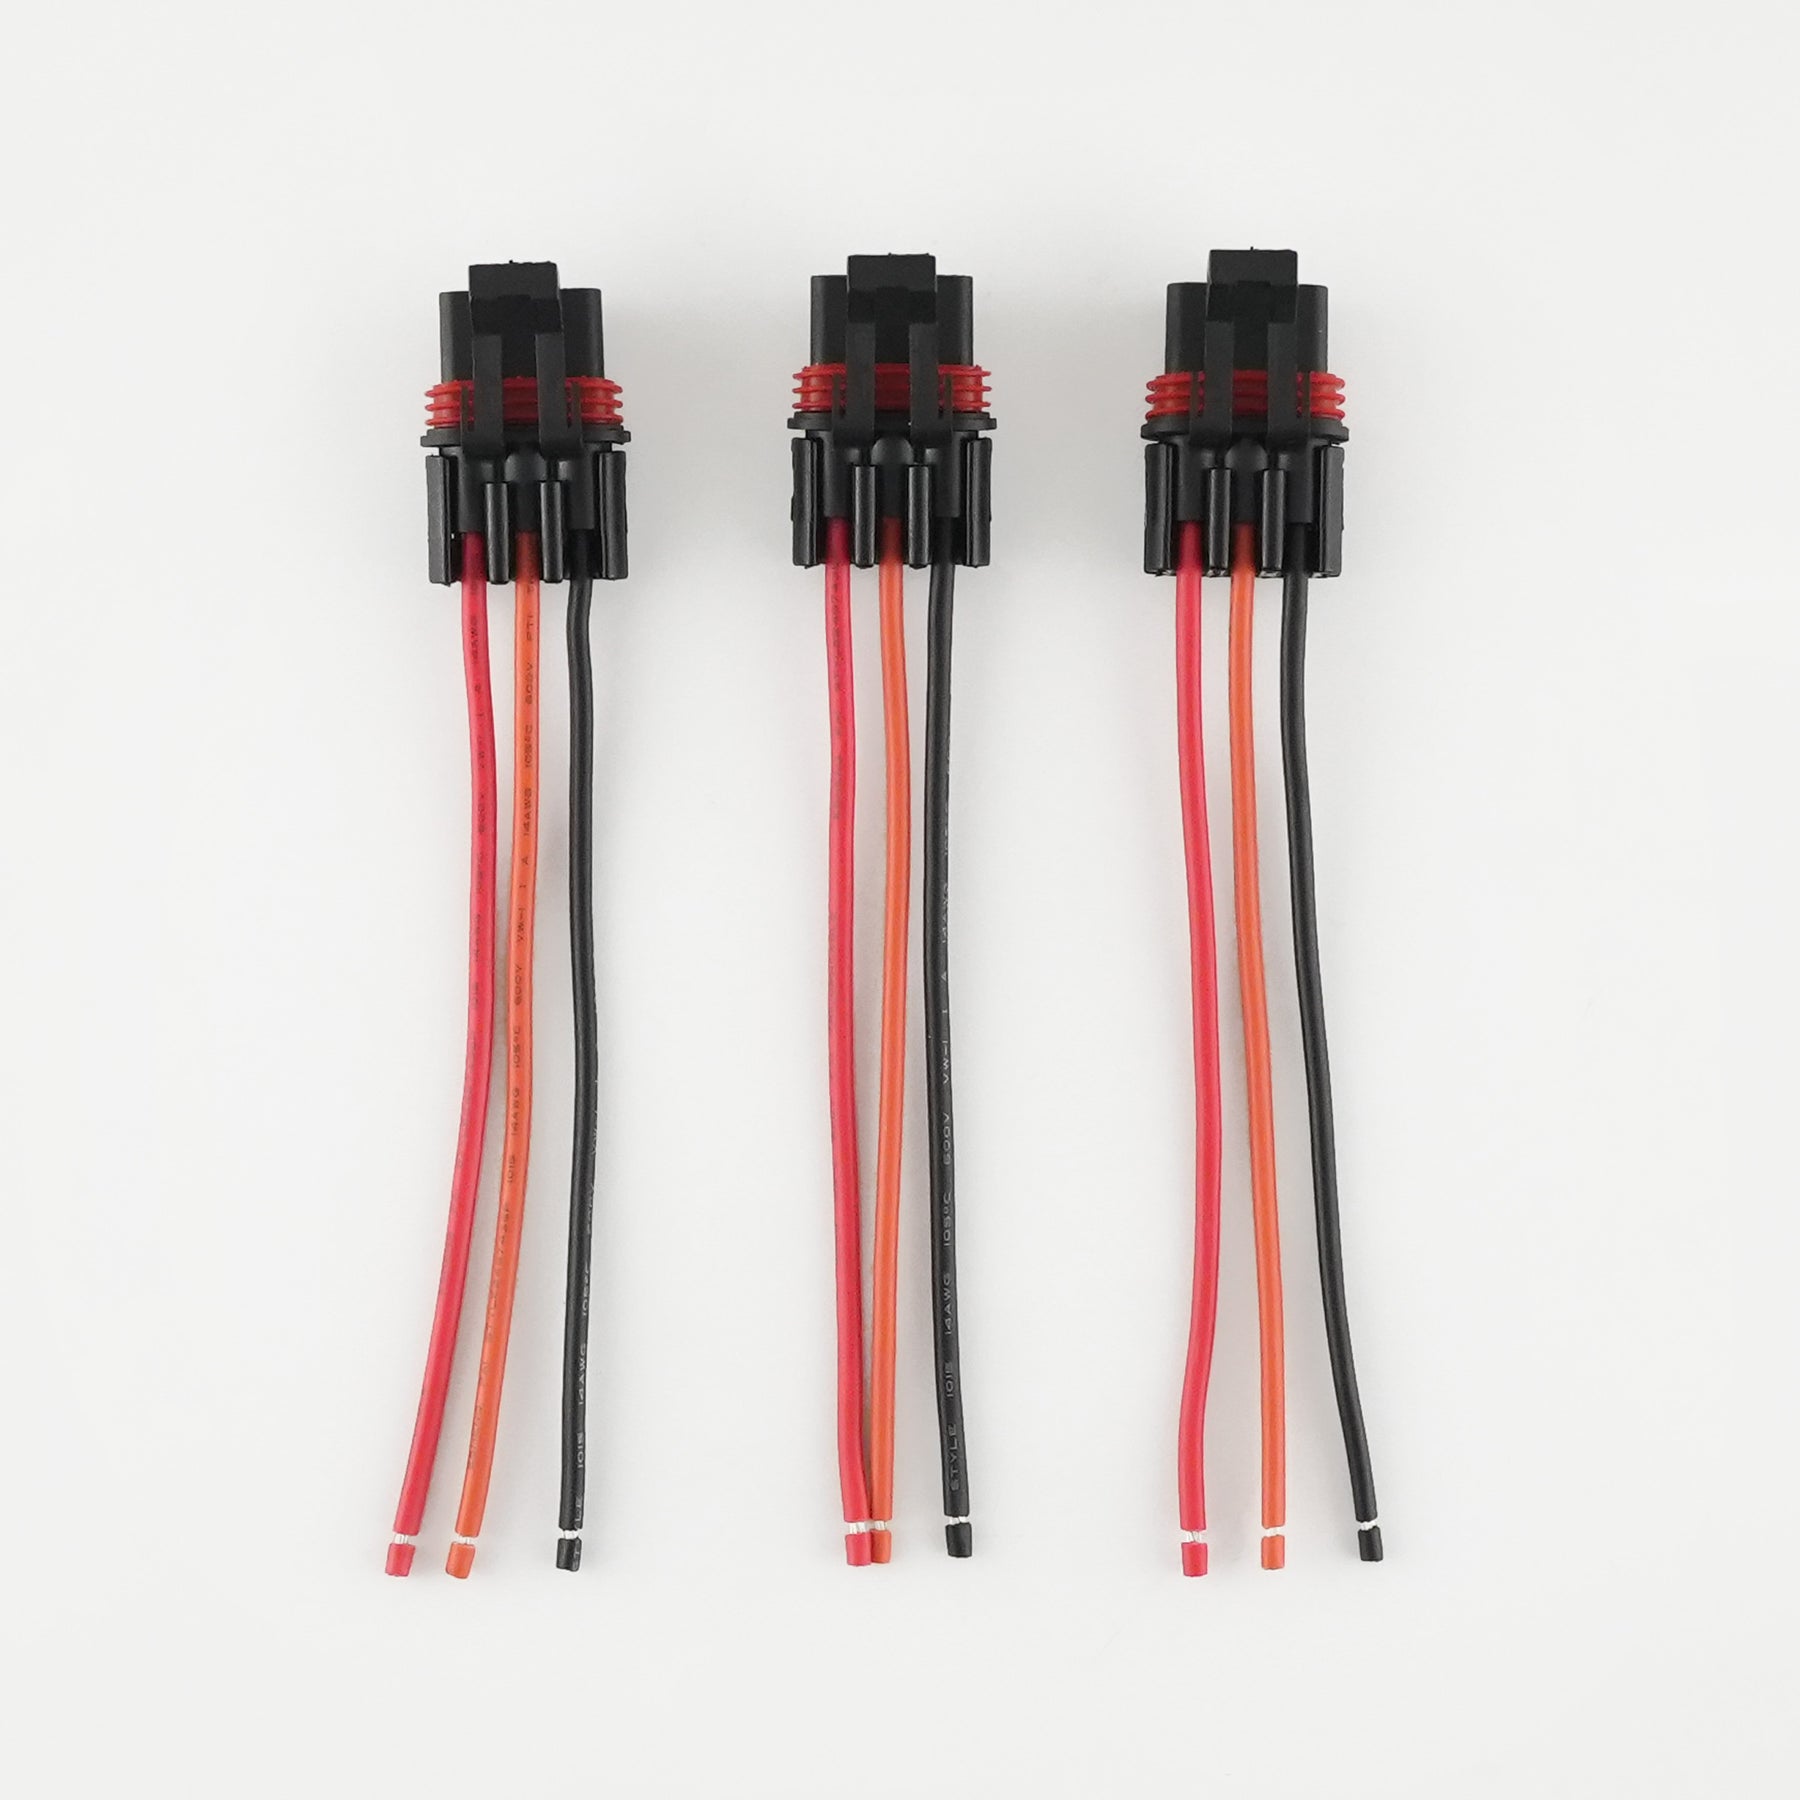 Polaris Pulse Busbar Pigtail Harness comes with three